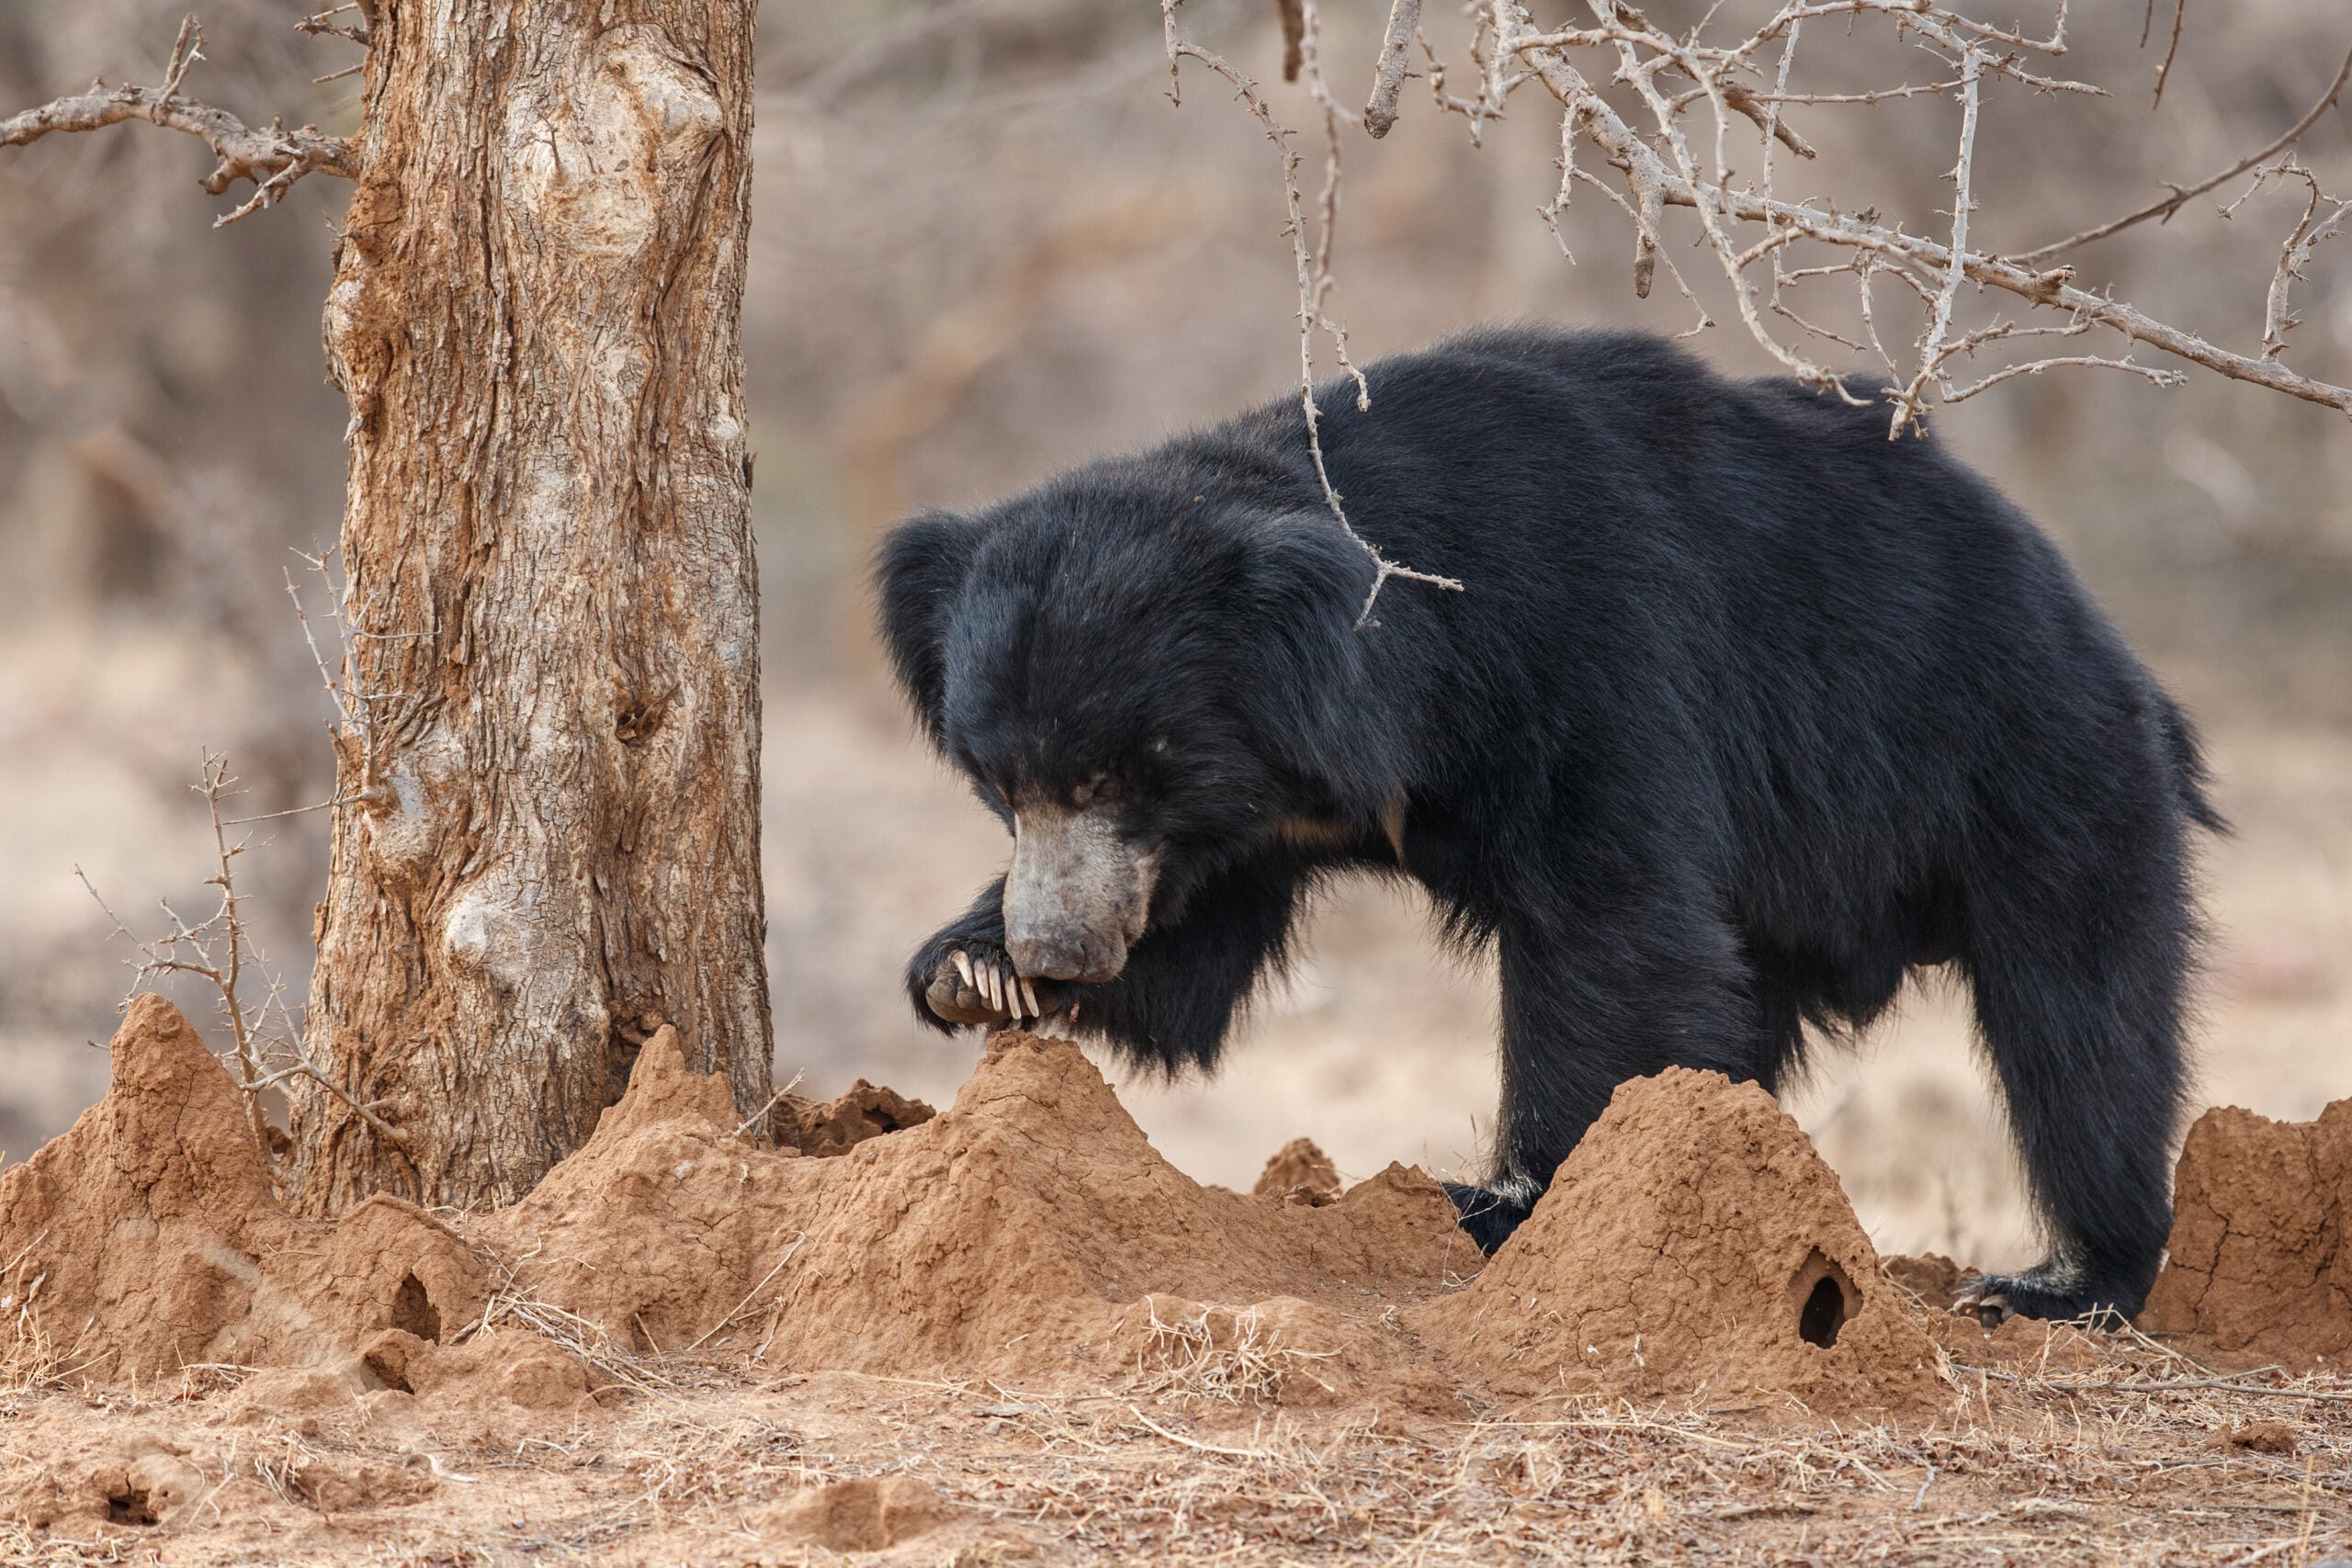 A sloth bear investigates termite mounds in India